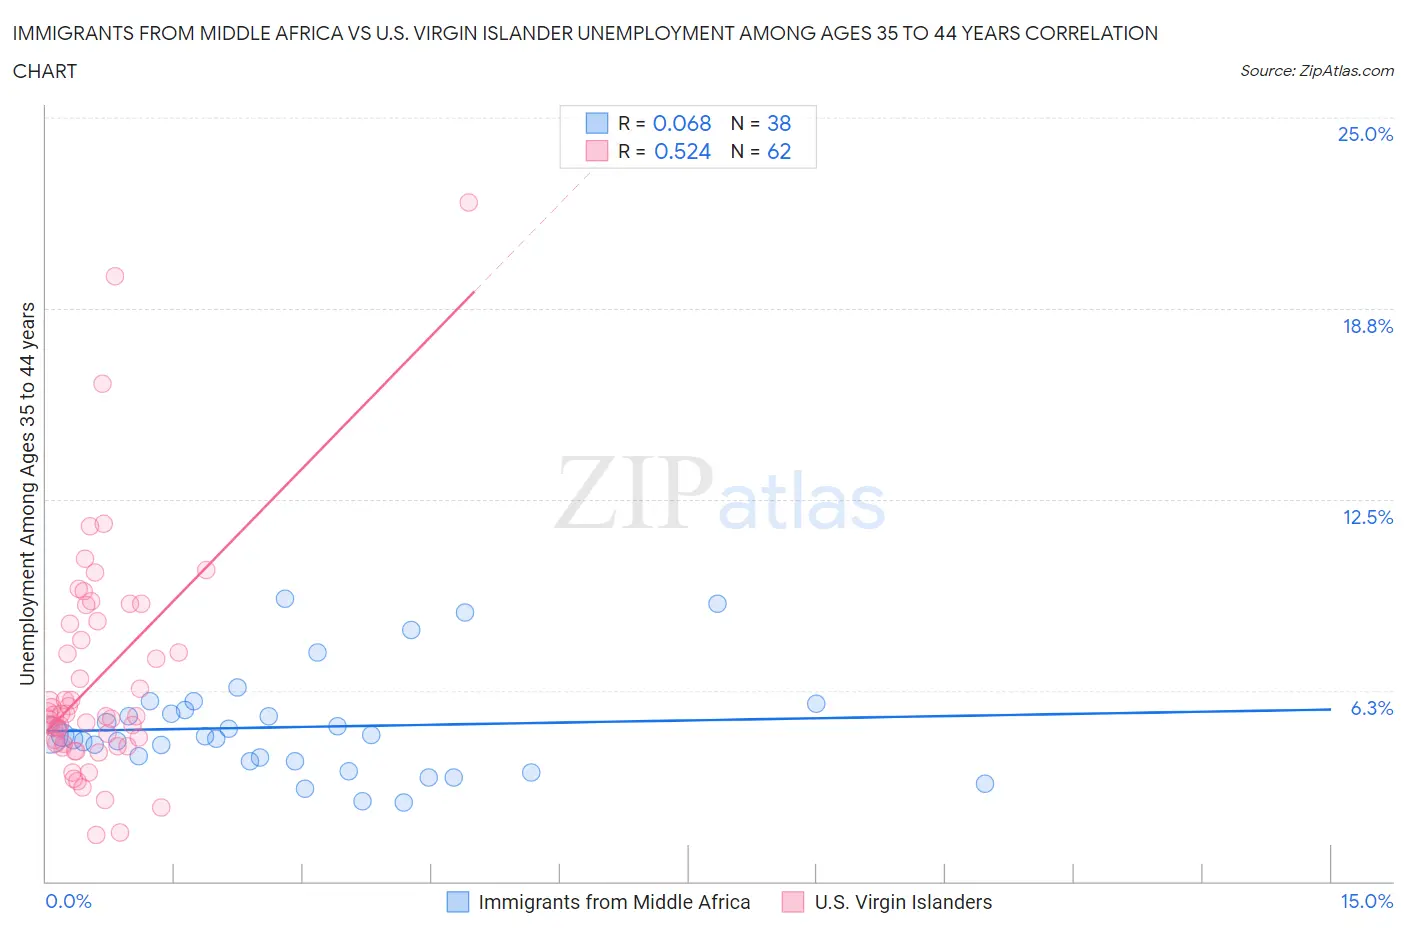 Immigrants from Middle Africa vs U.S. Virgin Islander Unemployment Among Ages 35 to 44 years